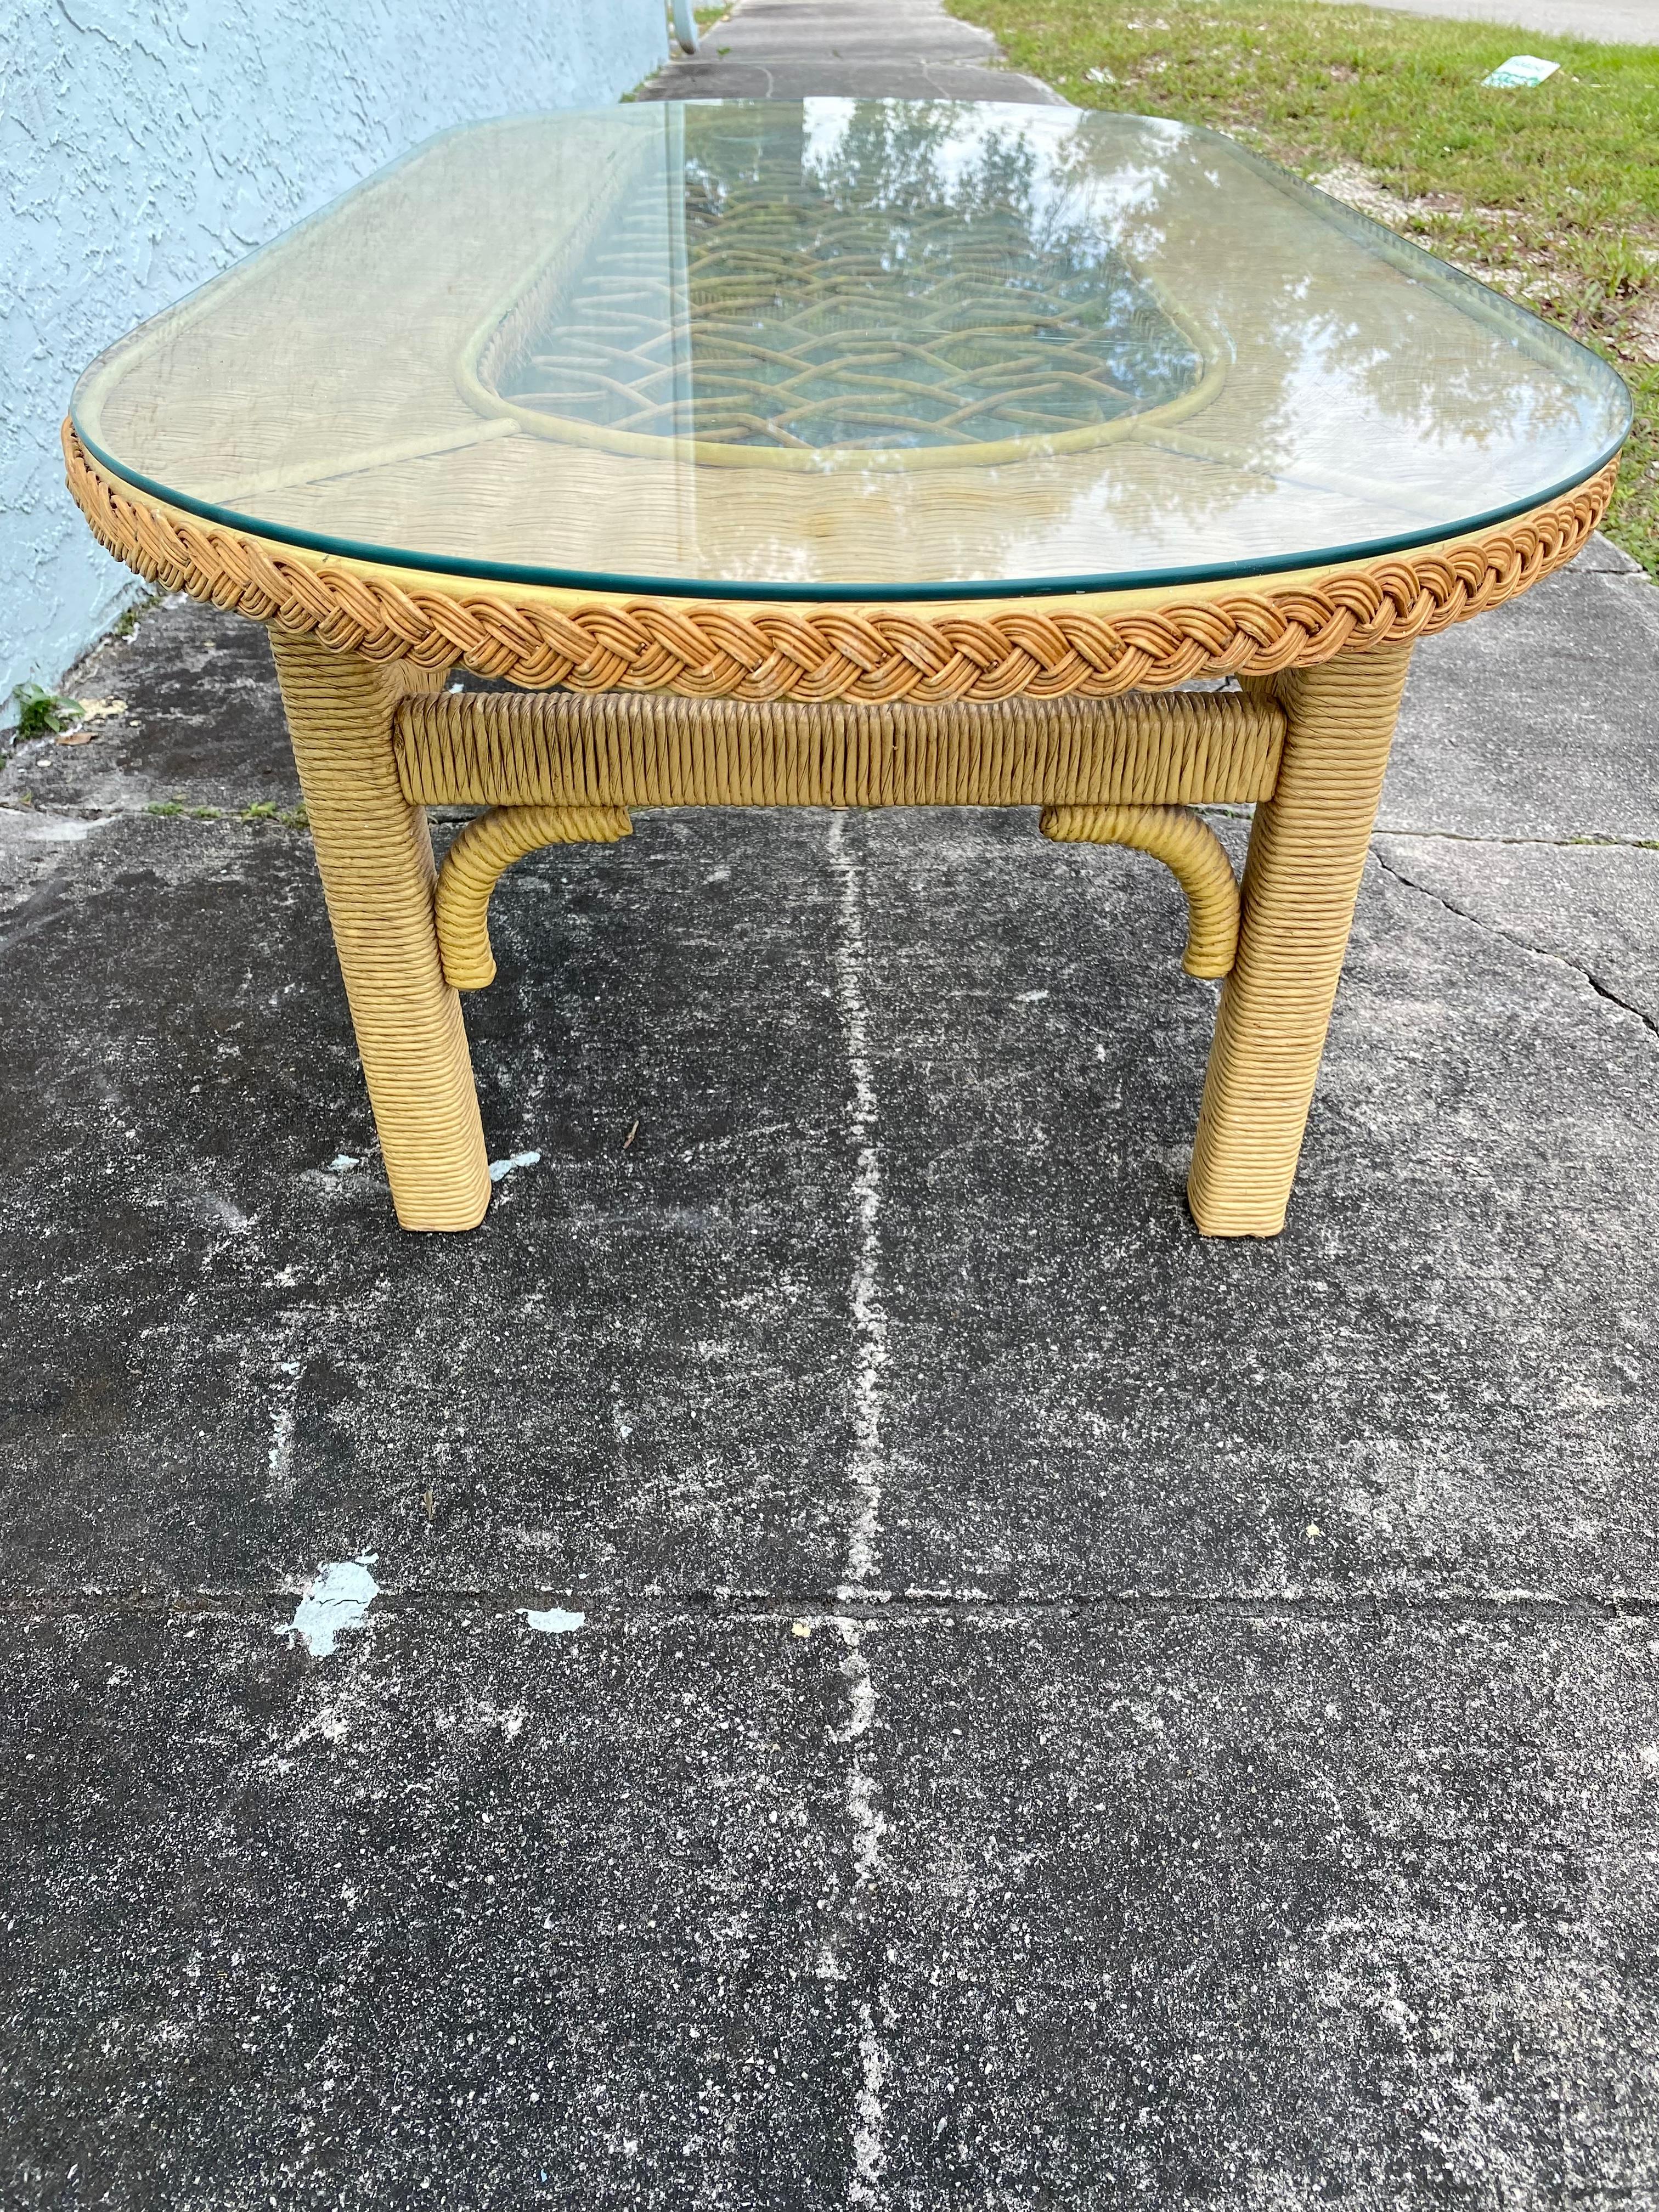 Mid-20th Century 1960s Oval Rattan Braided Wicker Lattice Glass Coffee Table For Sale